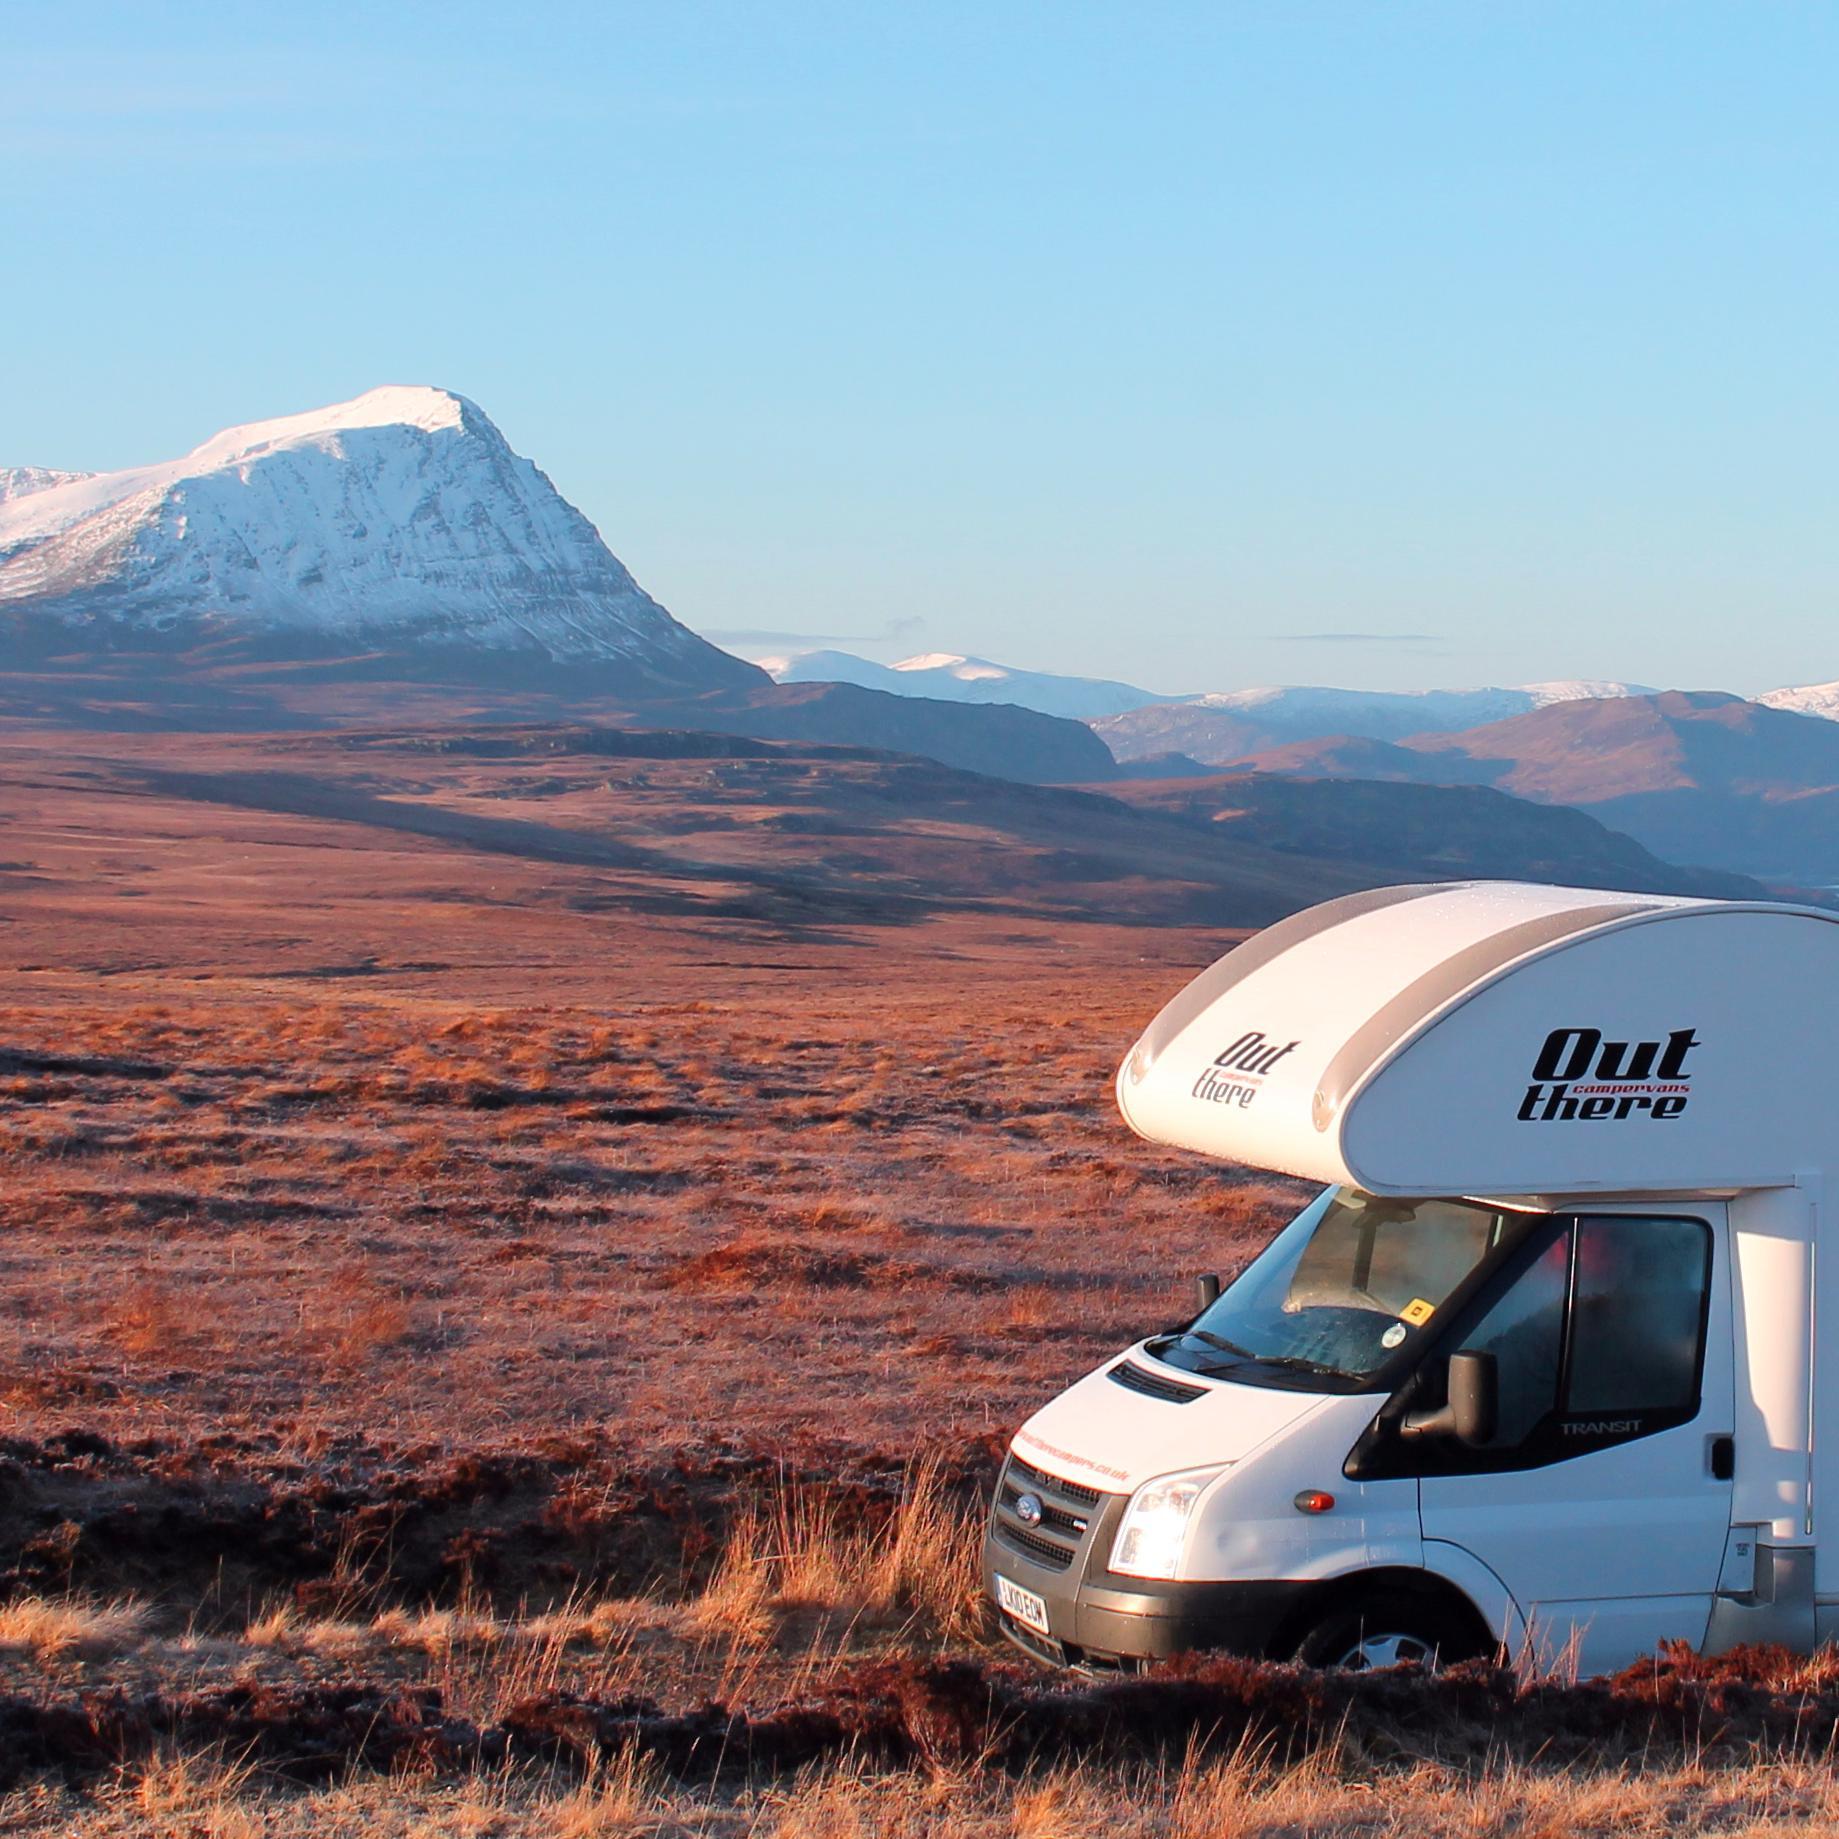 Campervan & Motorhome hire in #Scotland. Luxury 4-6 person RVs ideal for #camping, #hillwalking & exploring the stunning Scottish countryside. Get OutThere!